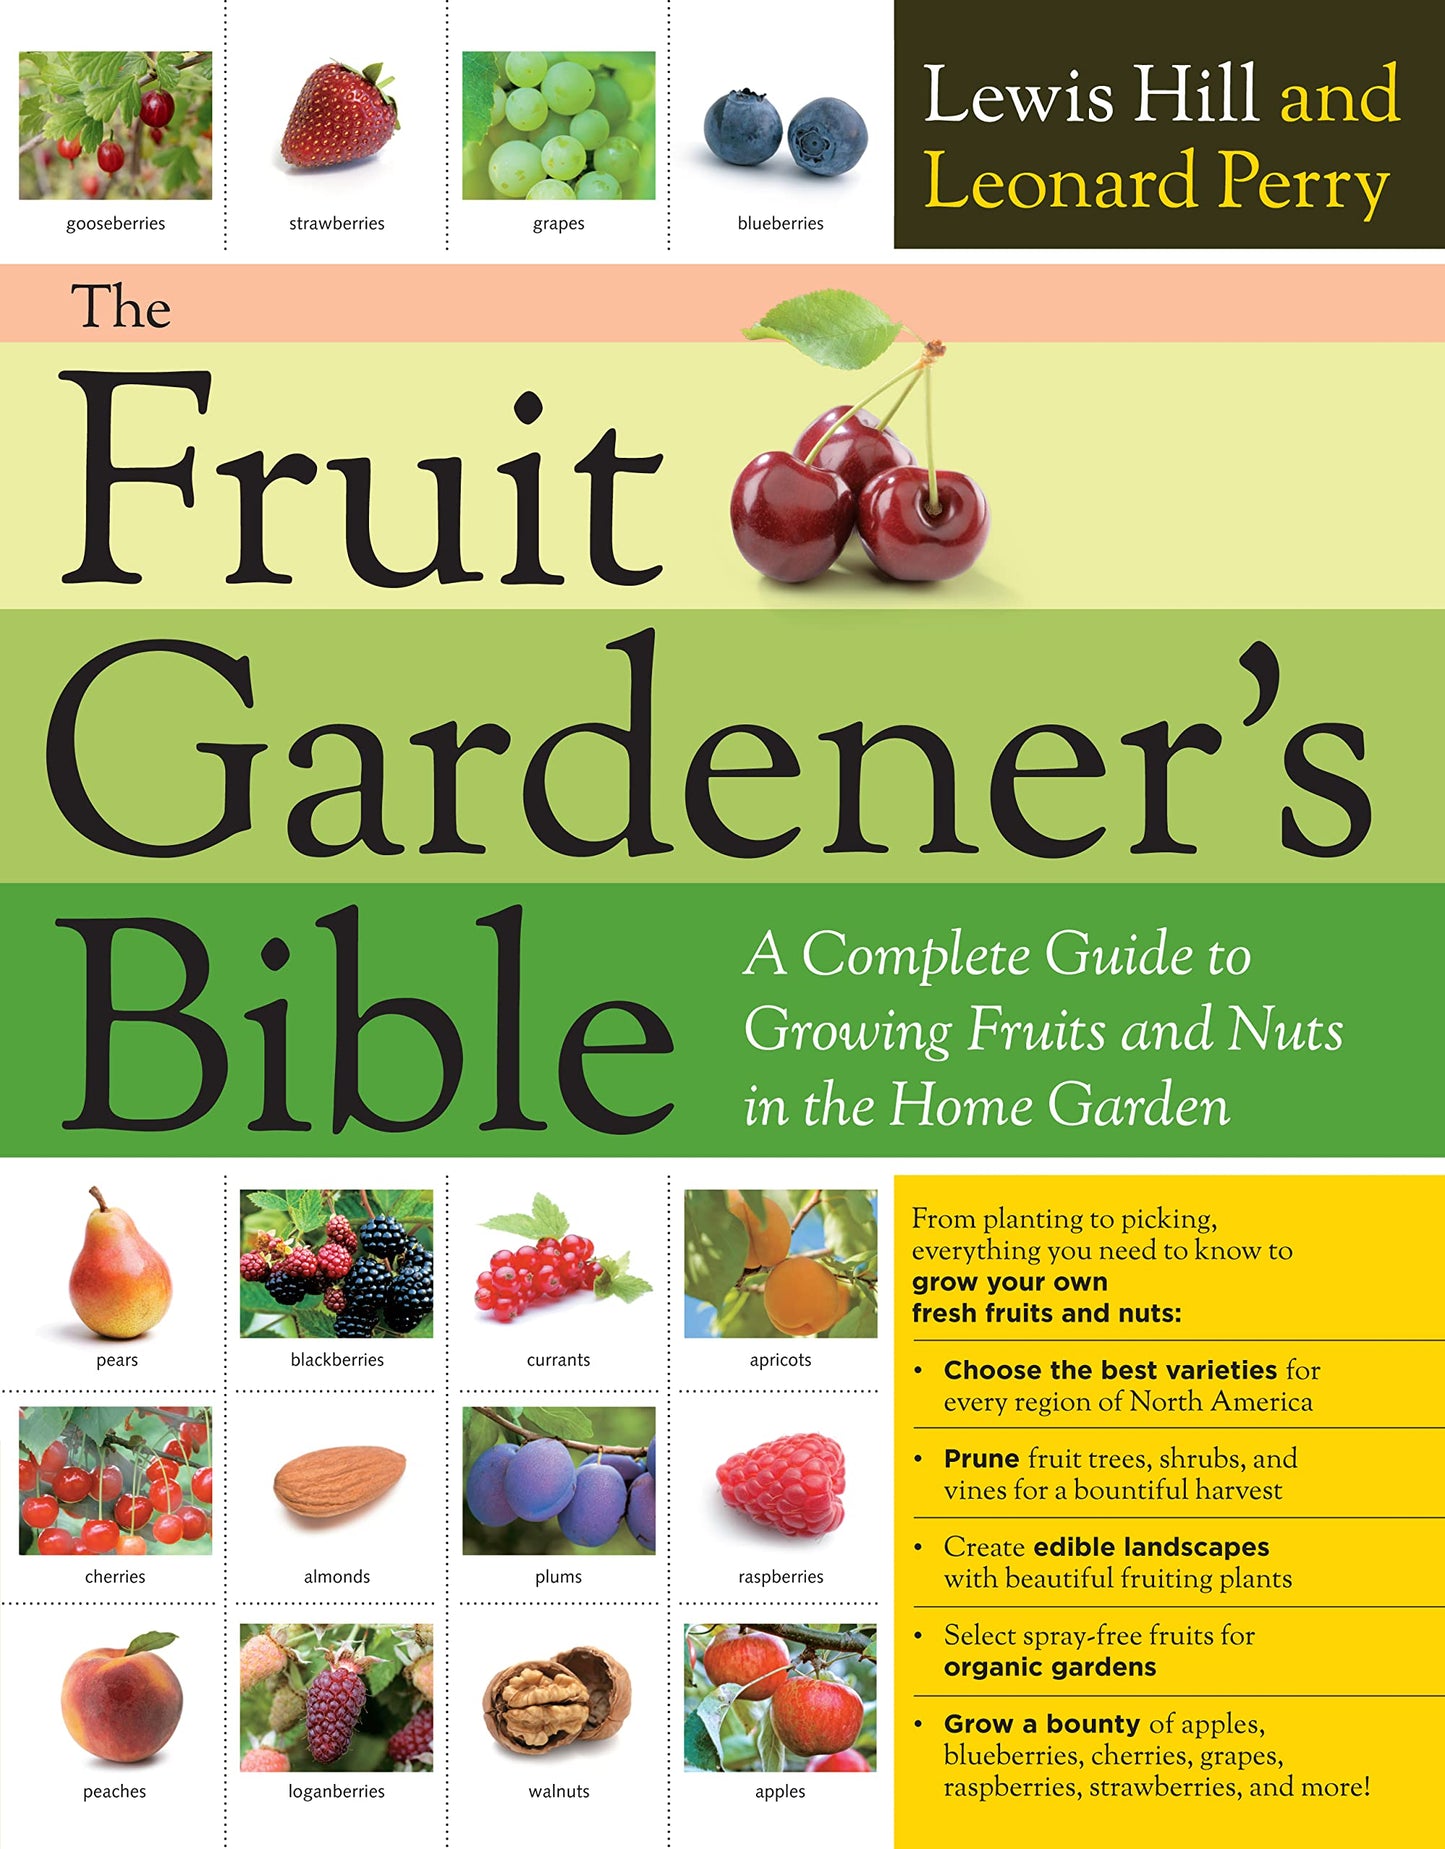 Fruit Gardener's Bible: A Complete Guide to Growing Fruits and Nuts in the Home Garden